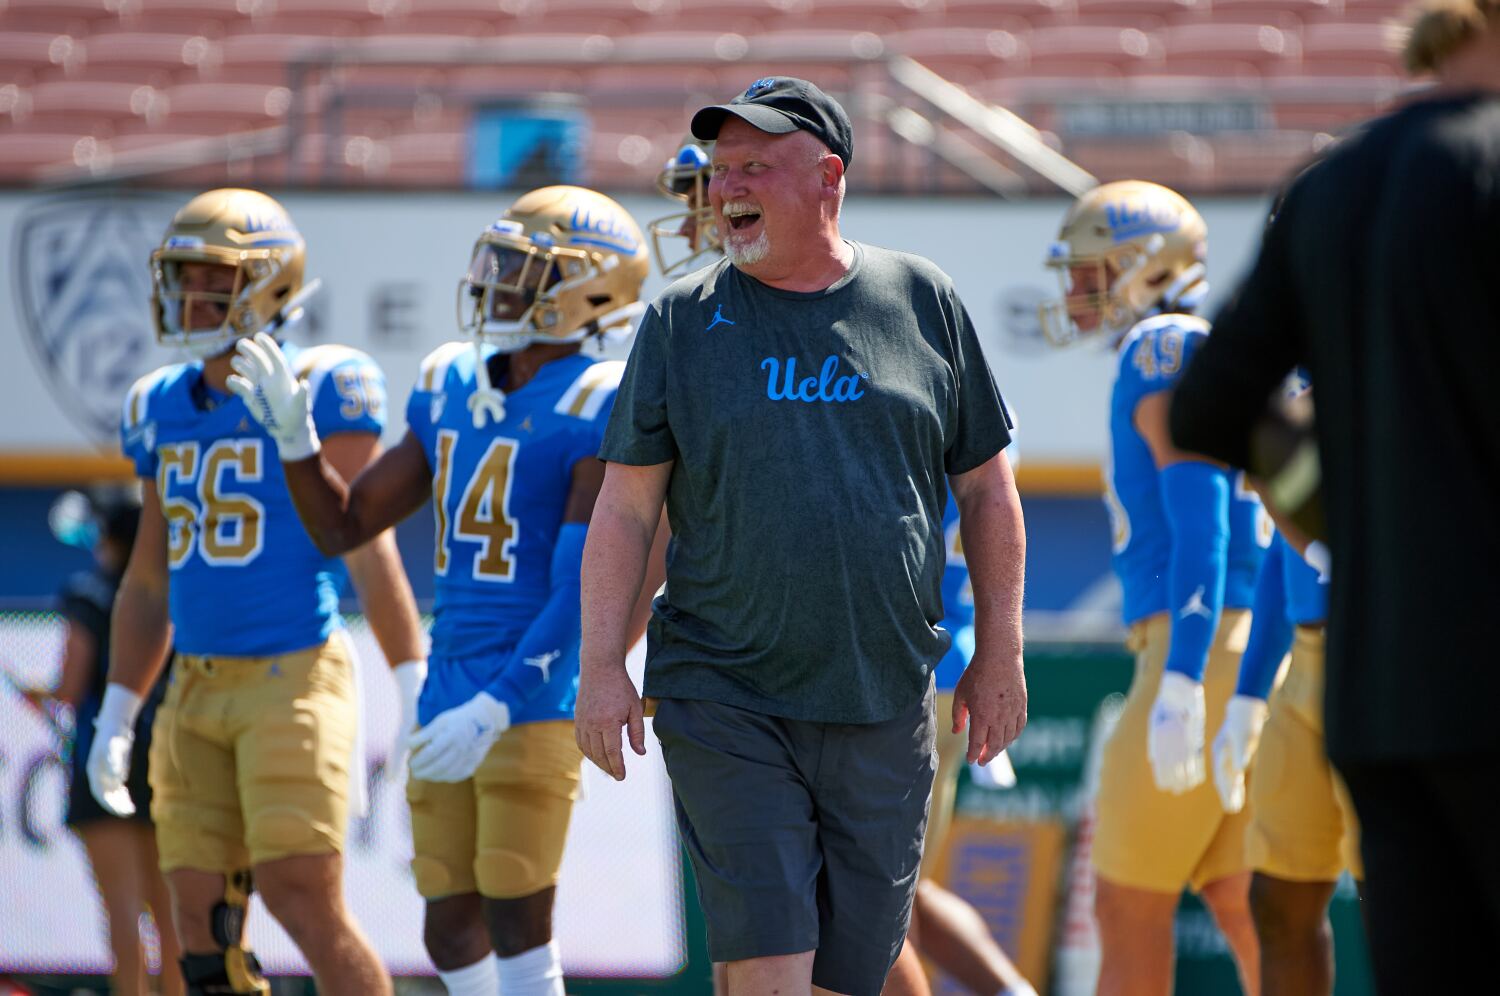 UCLA defensive coordinator Bill McGovern is back for Sun Bowl after health issues